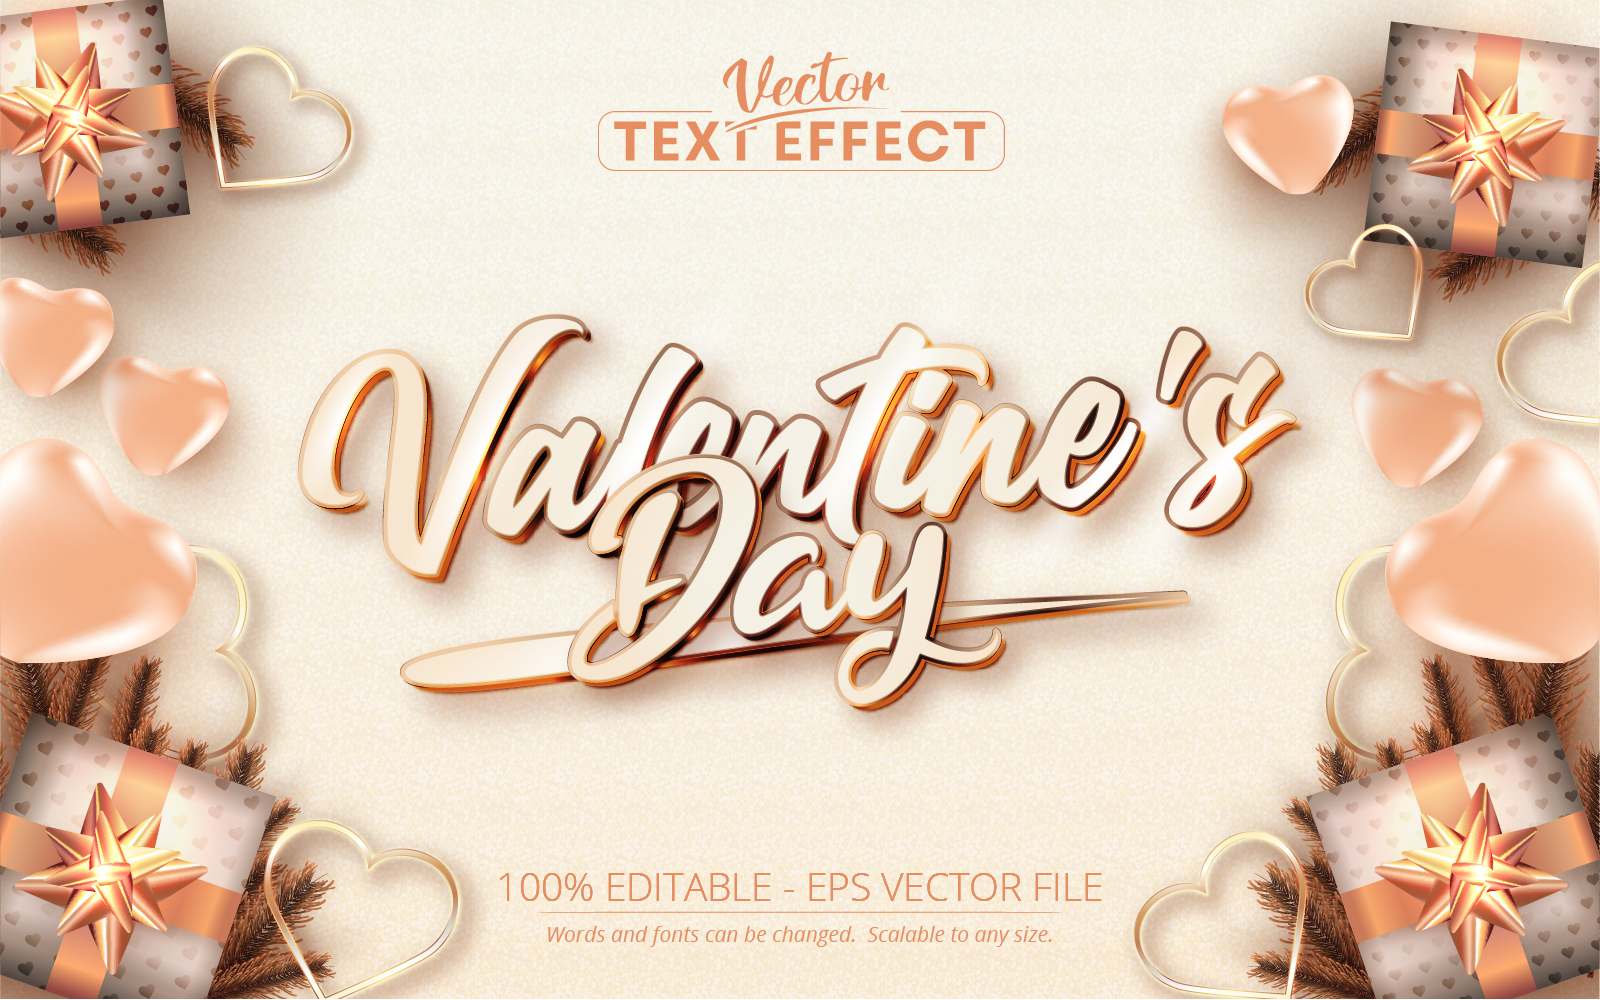 Valentine’s Day Rose Gold Text Effect - Vector Image